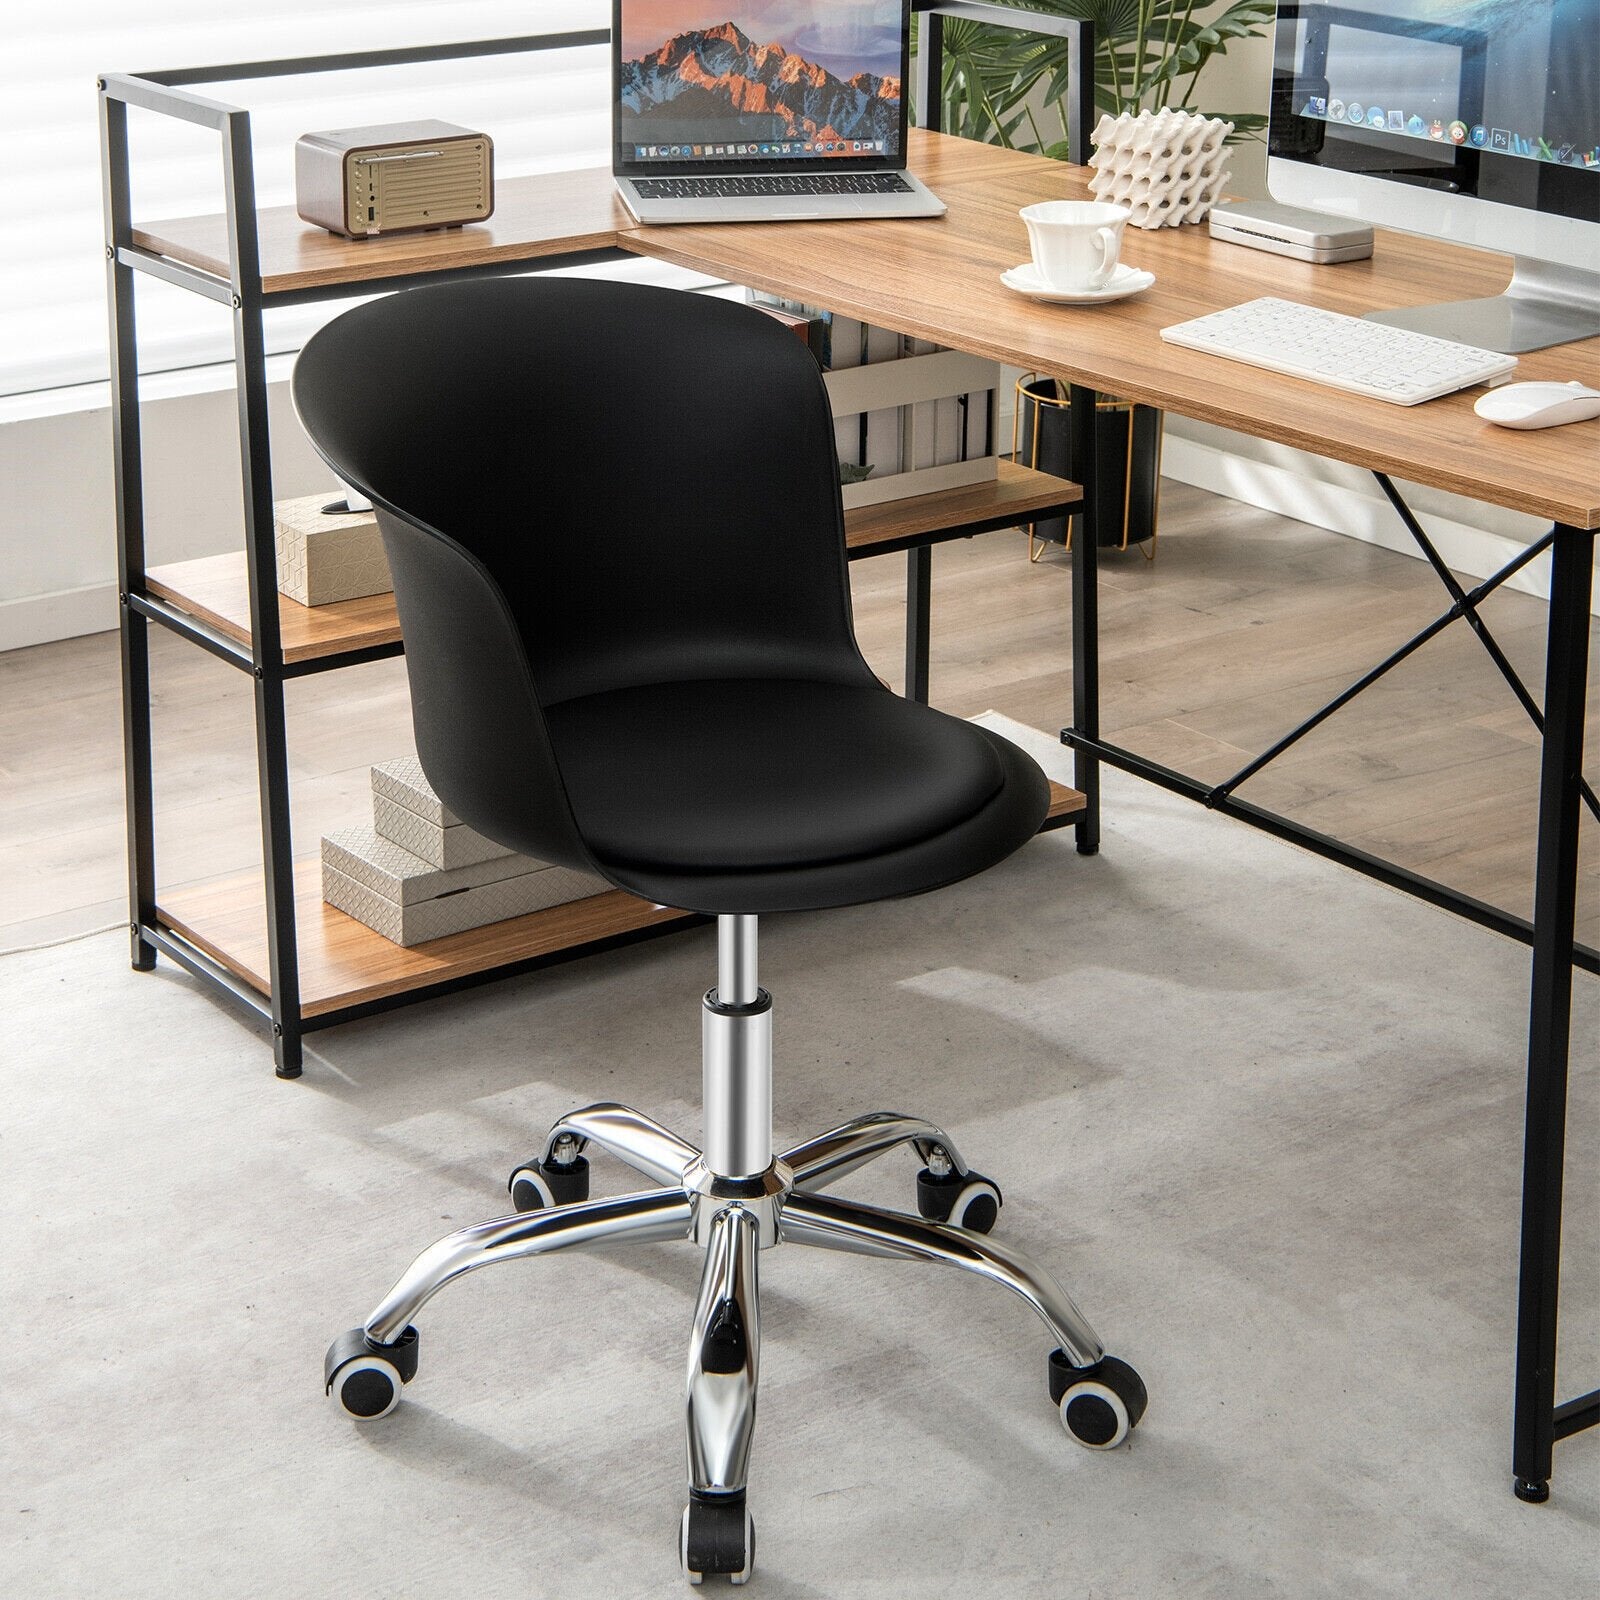 Set of 2 Office Desk Chair with Ergonomic Backrest and Soft Padded PU Leather Seat, Black at Gallery Canada